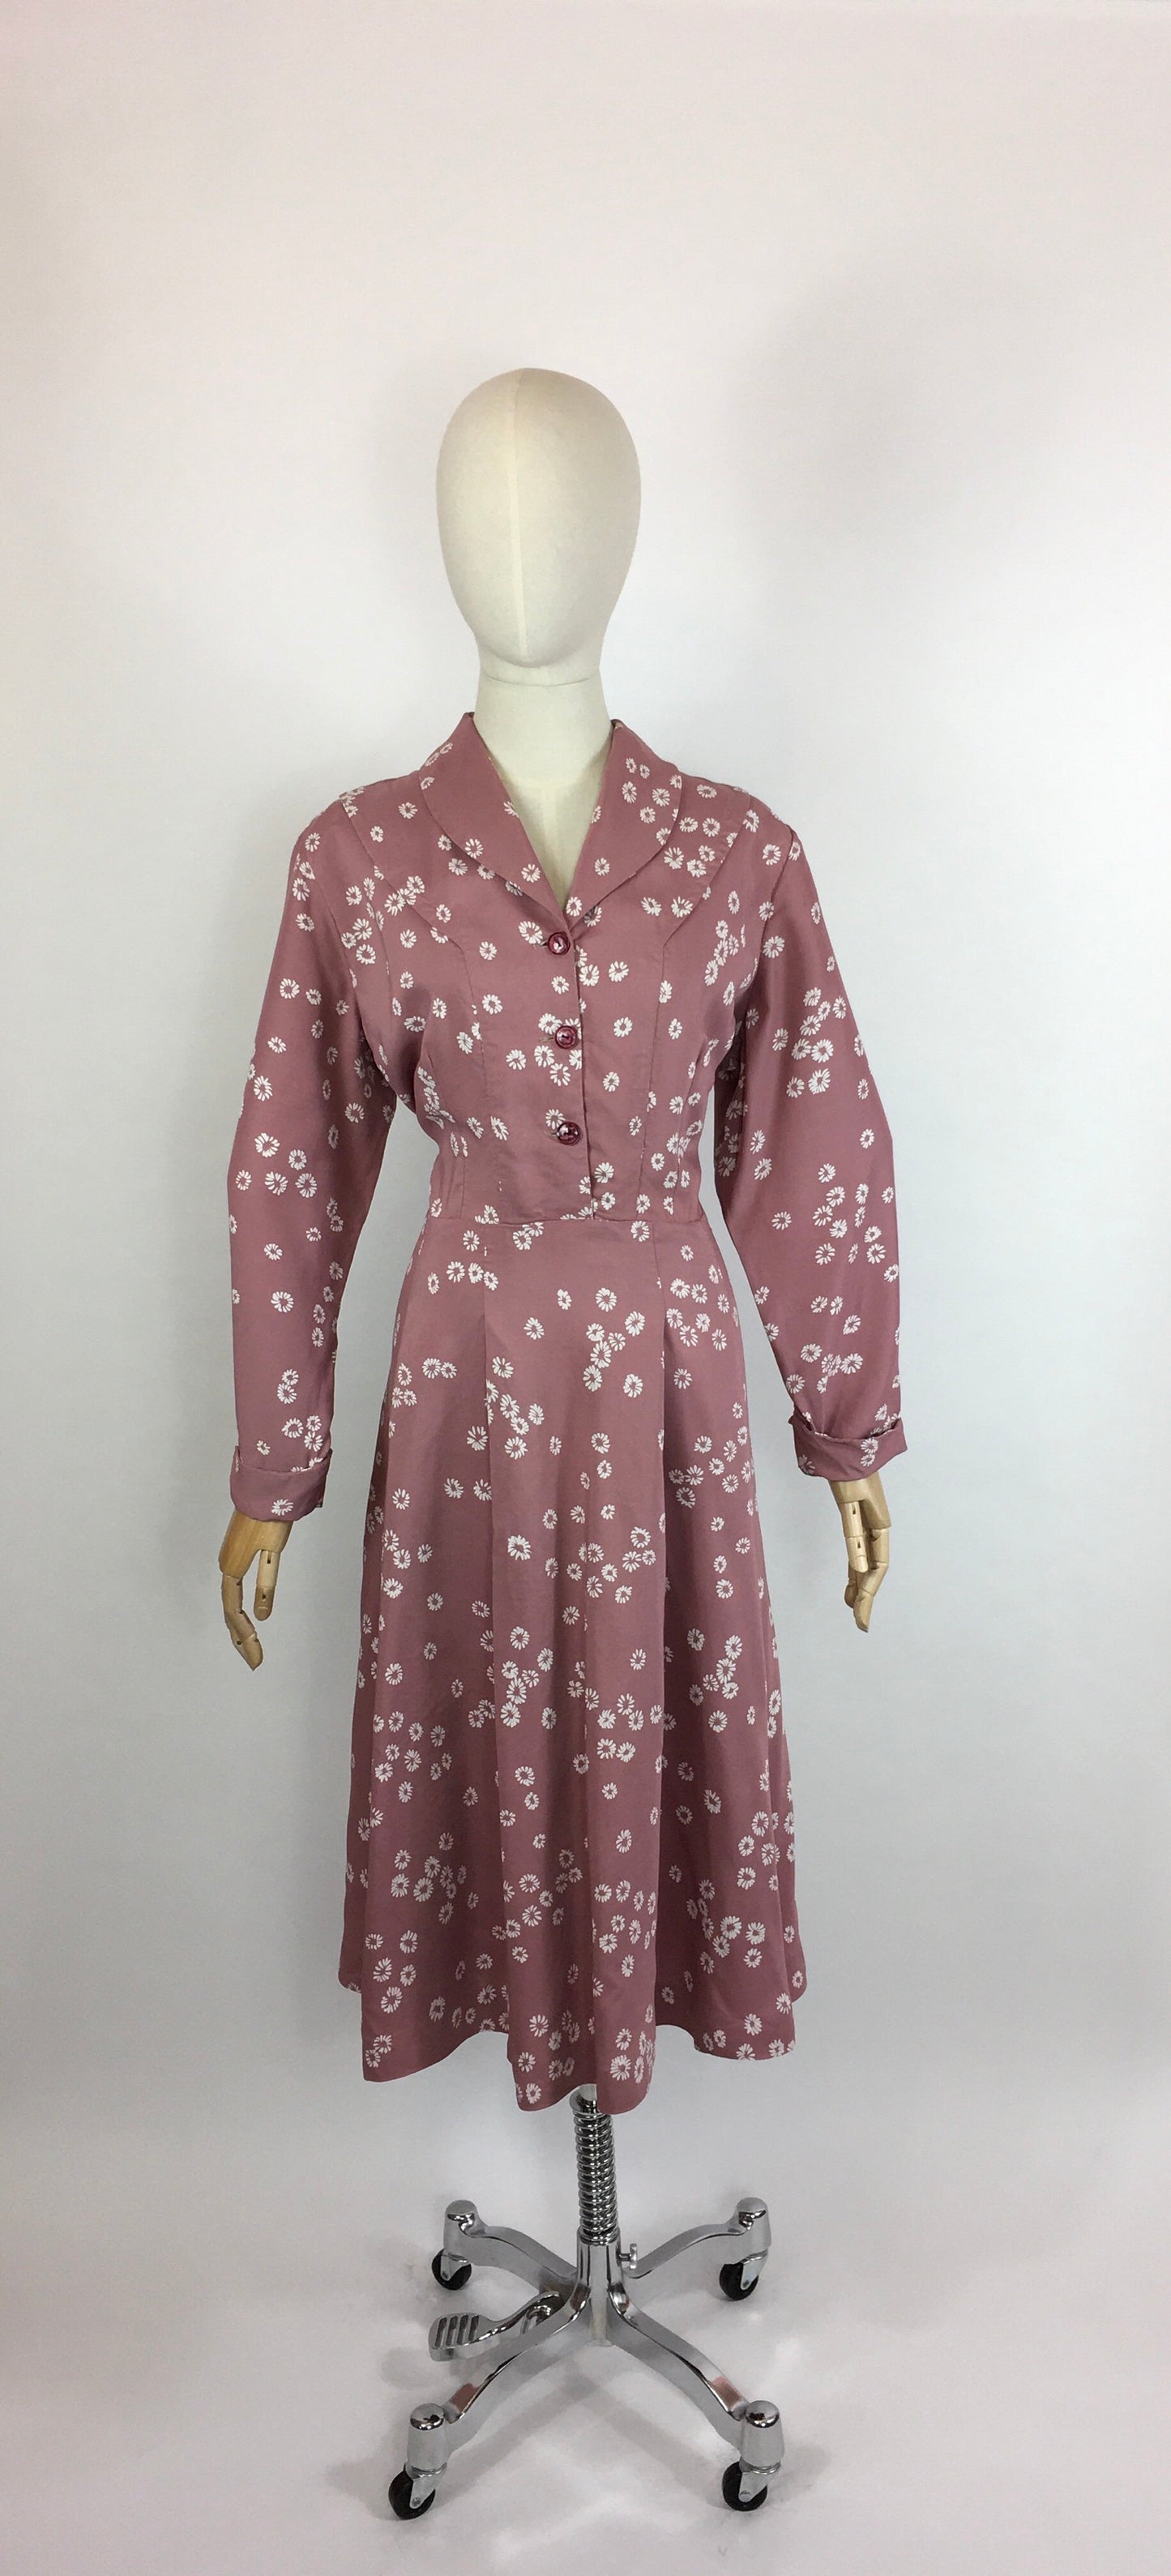 Original 1940s VOLUP Day Dress - In A Beautiful Dusky Rose Rayon with White Daisies